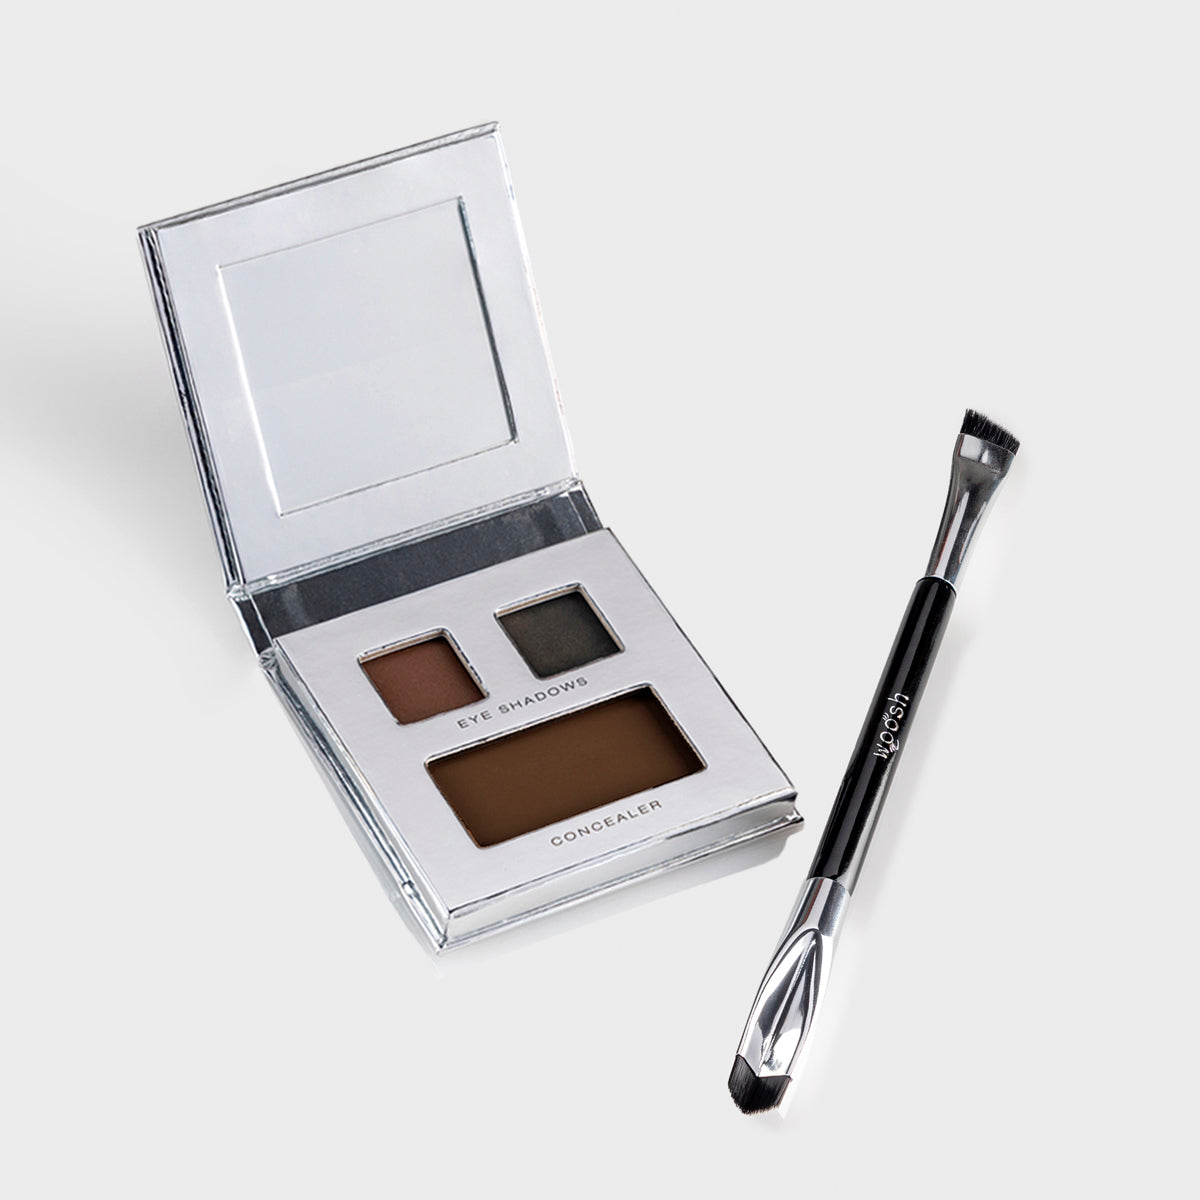 Smokey Eye Palette with two eyeshadows and one lava cake concealer with the Corner Brush